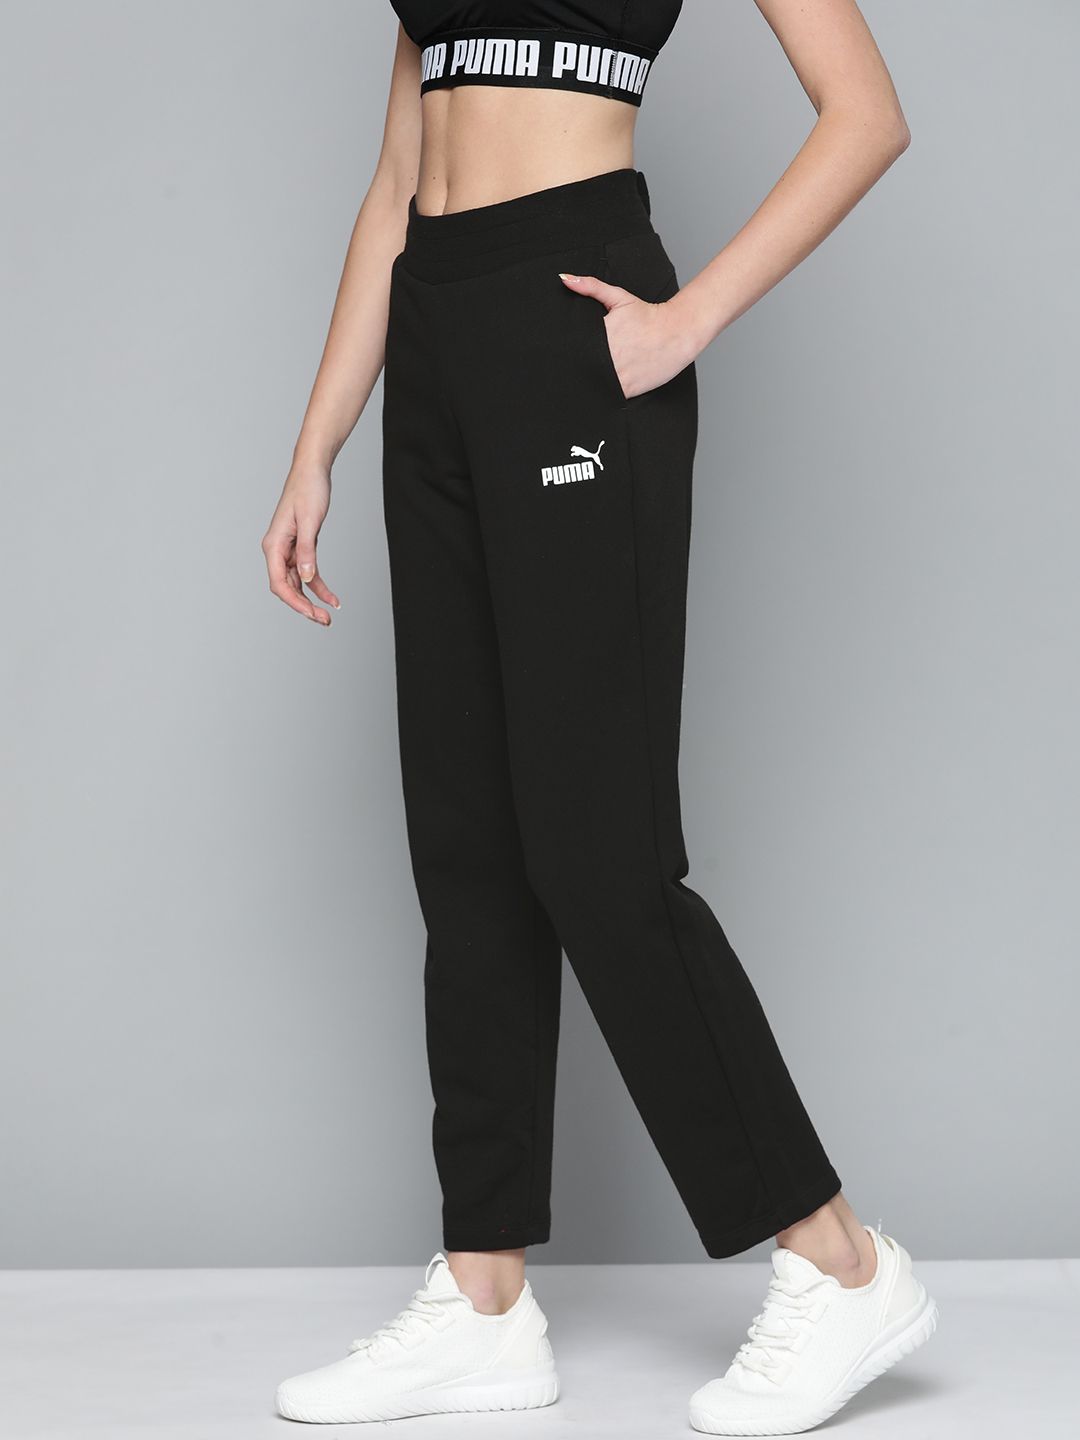 Puma Women Black Solid Track Pants Price in India